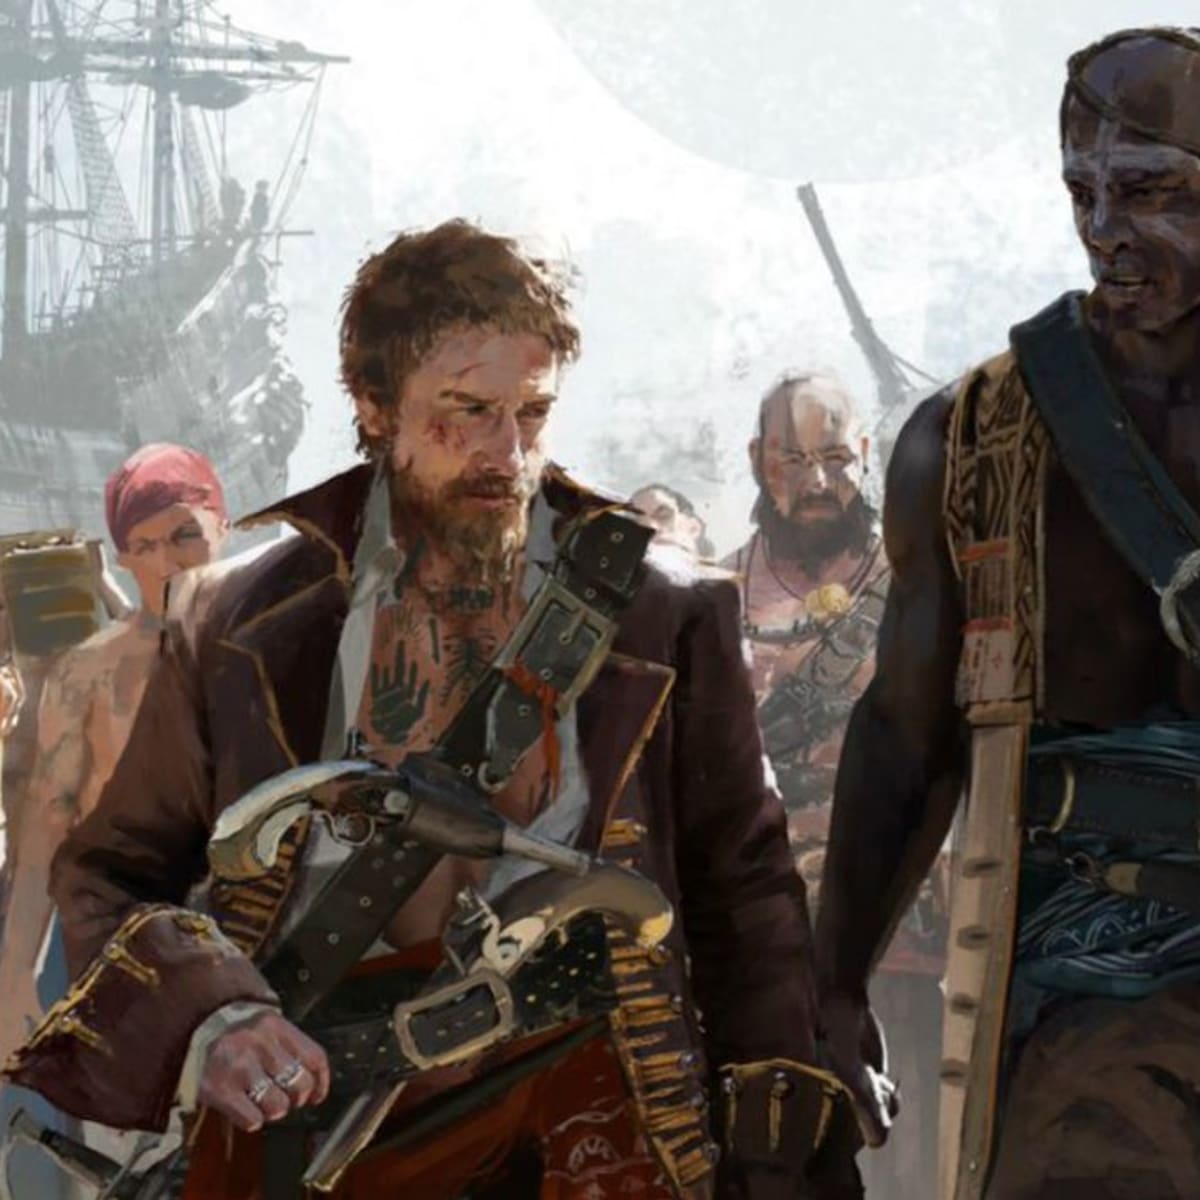 Skull and Bones: How to change clothes - Video Games on Sports Illustrated